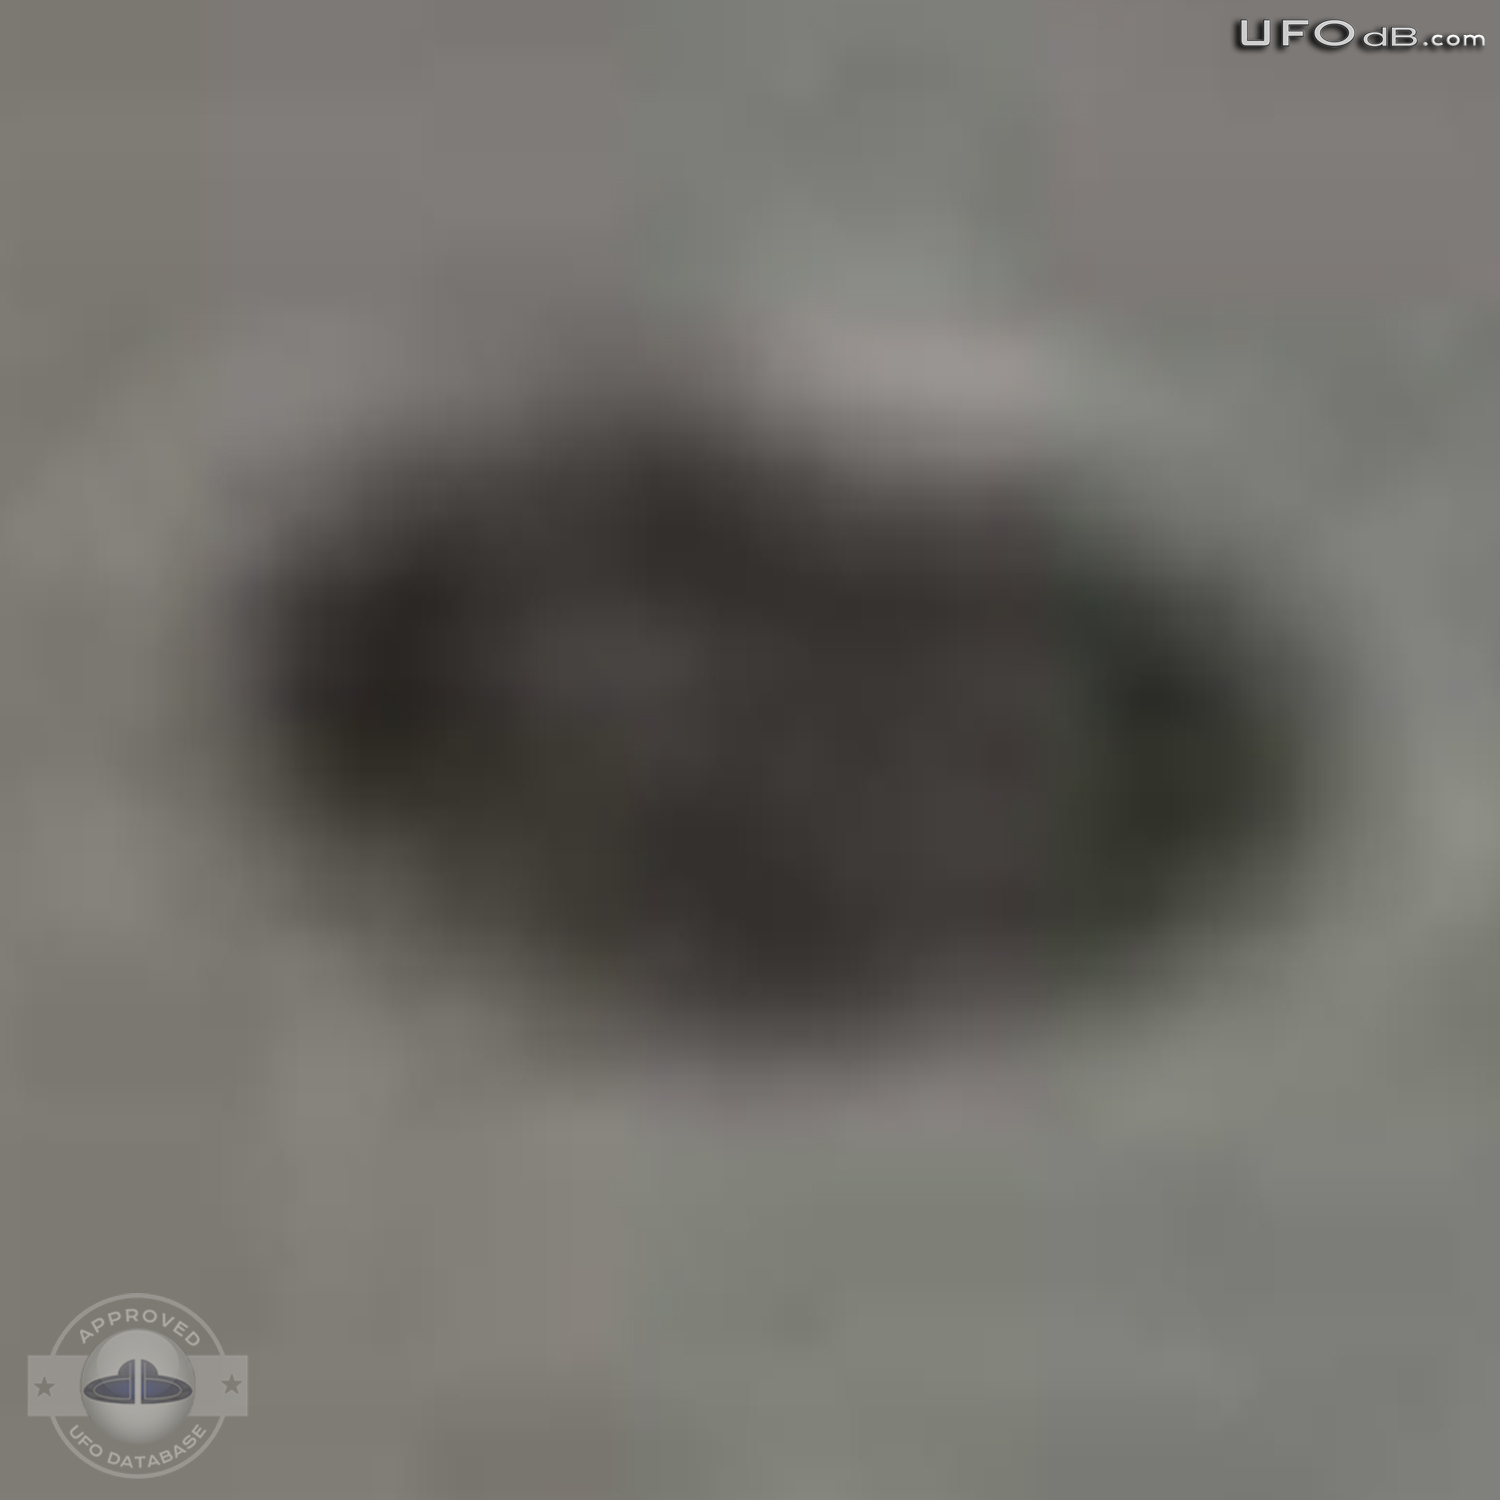 Old Grey 1956 Saucer UFO picture from Rio de Janeiro Brazil UFO Picture #370-5